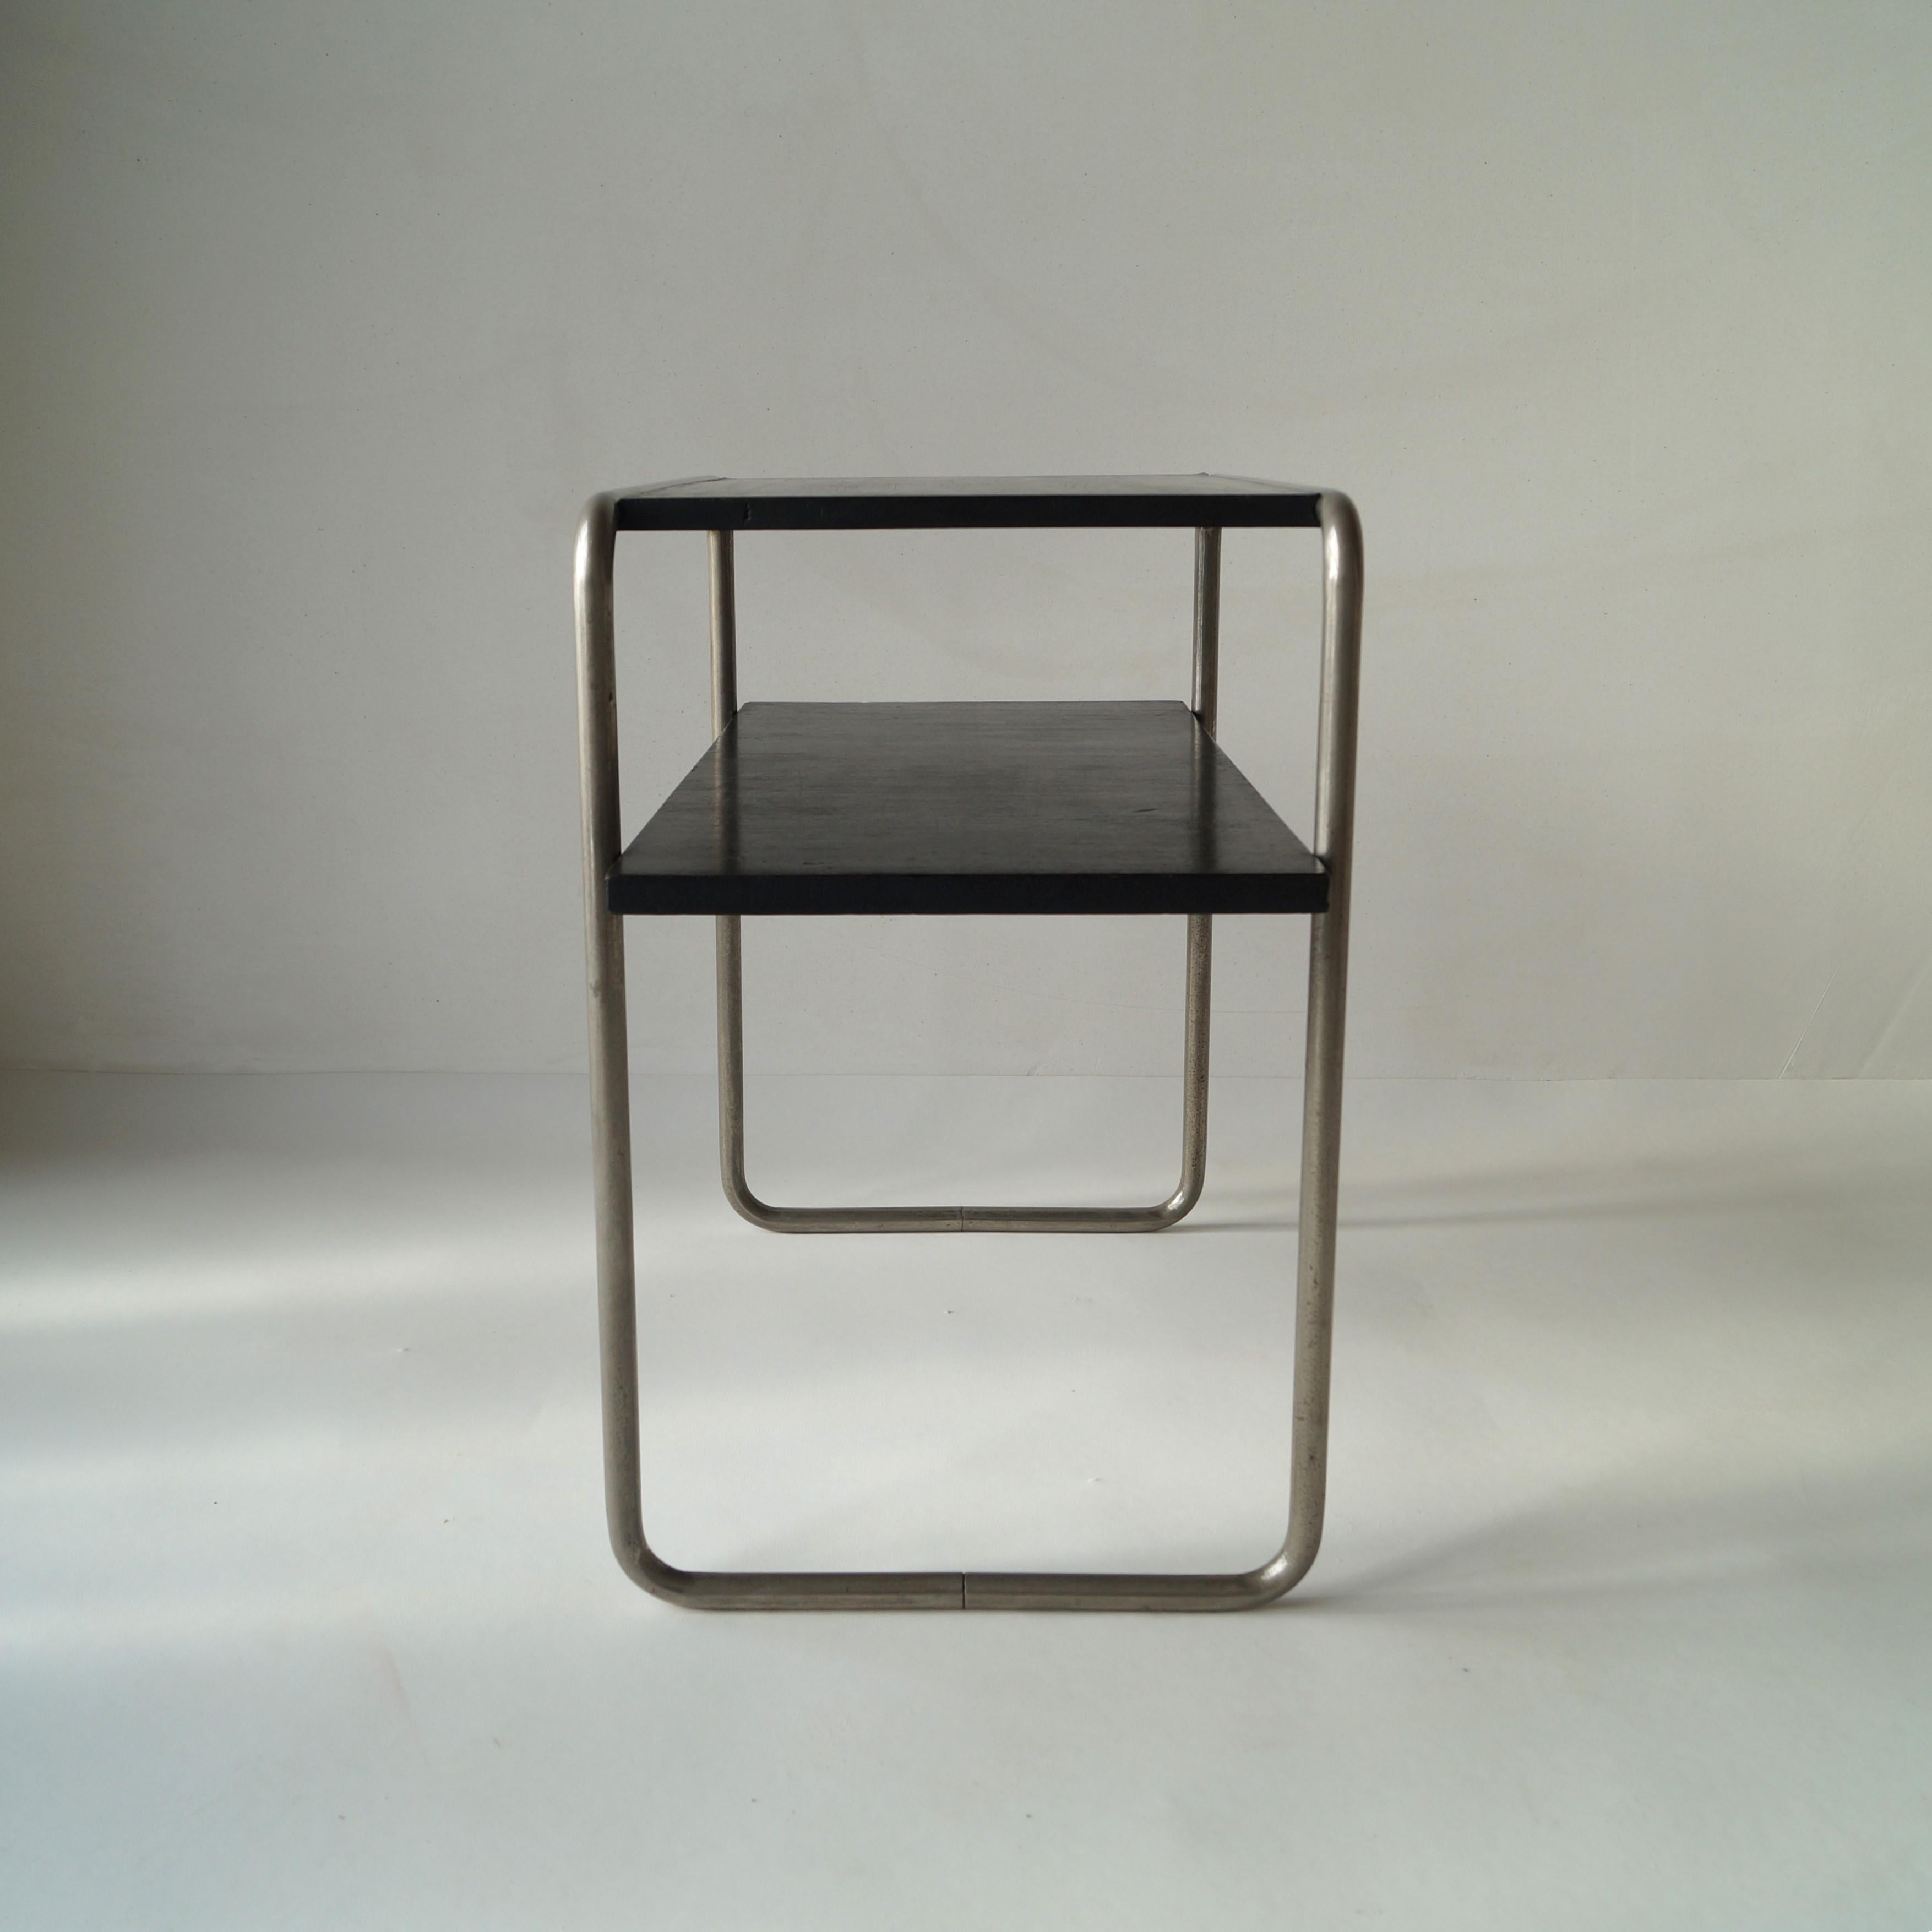 Steel Bauhaus console table Model B12 by Marcel Breuer for Thonet, 1930s For Sale